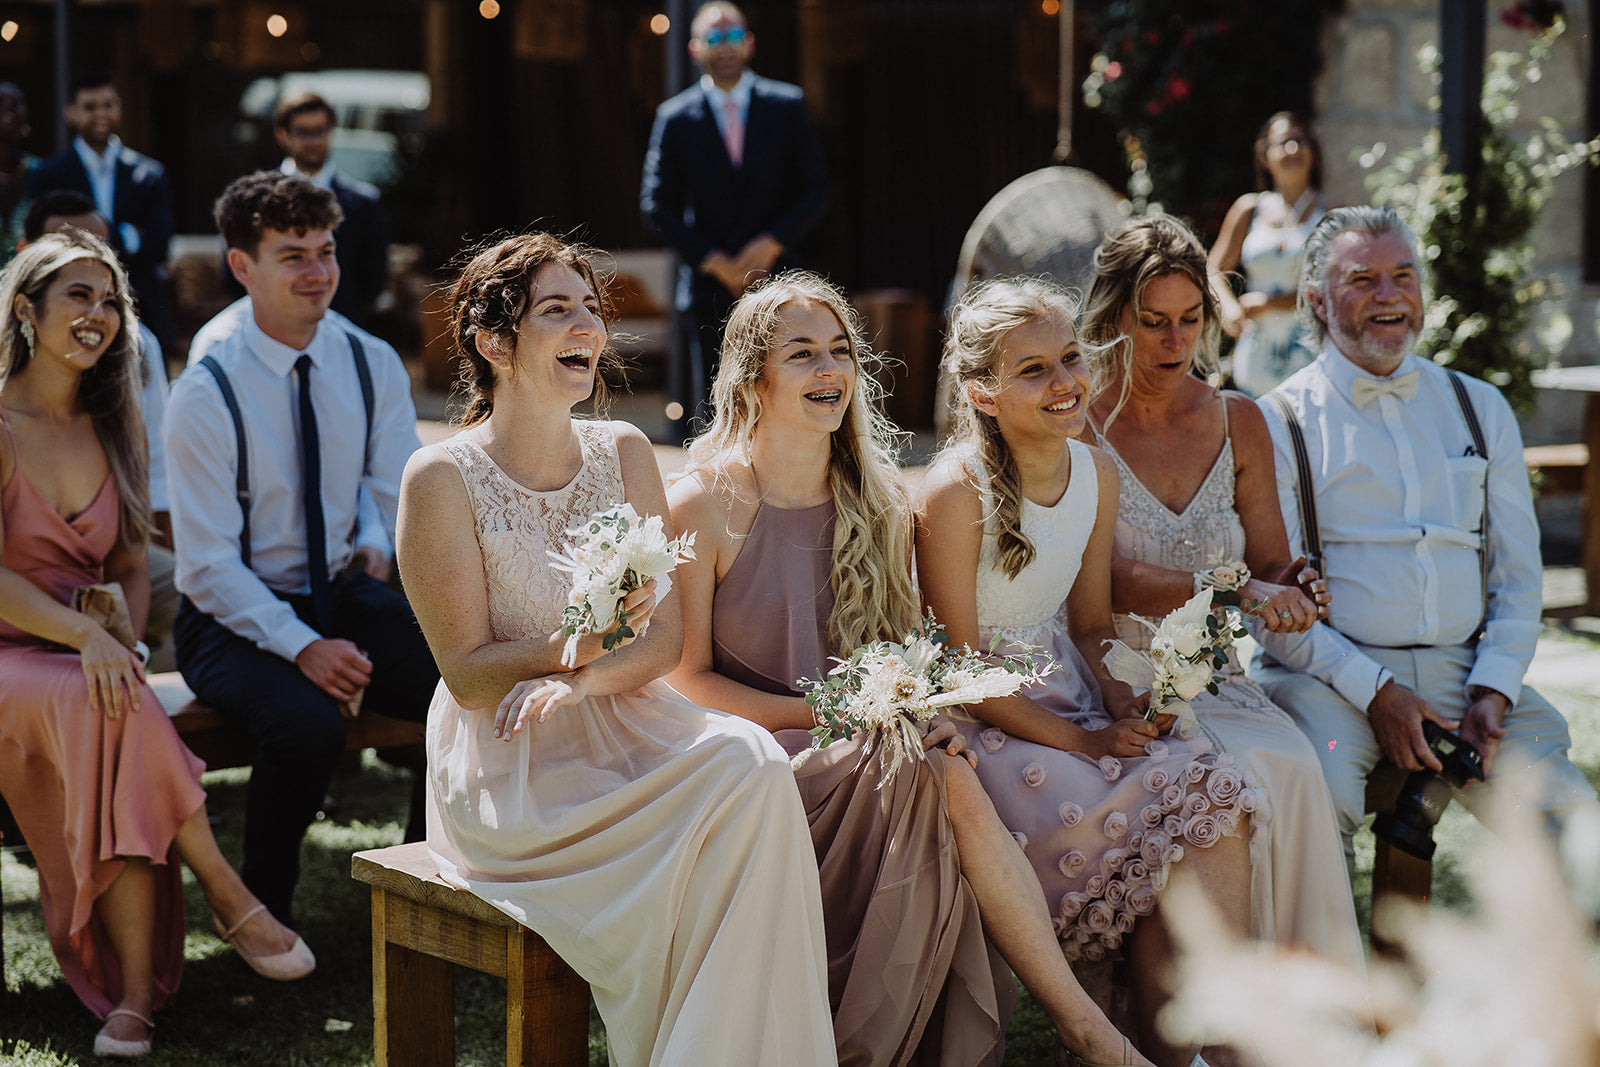 The Bridesmaids and Mother of the Bride seated at the outdoor ceremony, wearing their pre-loved dresses, laughing.